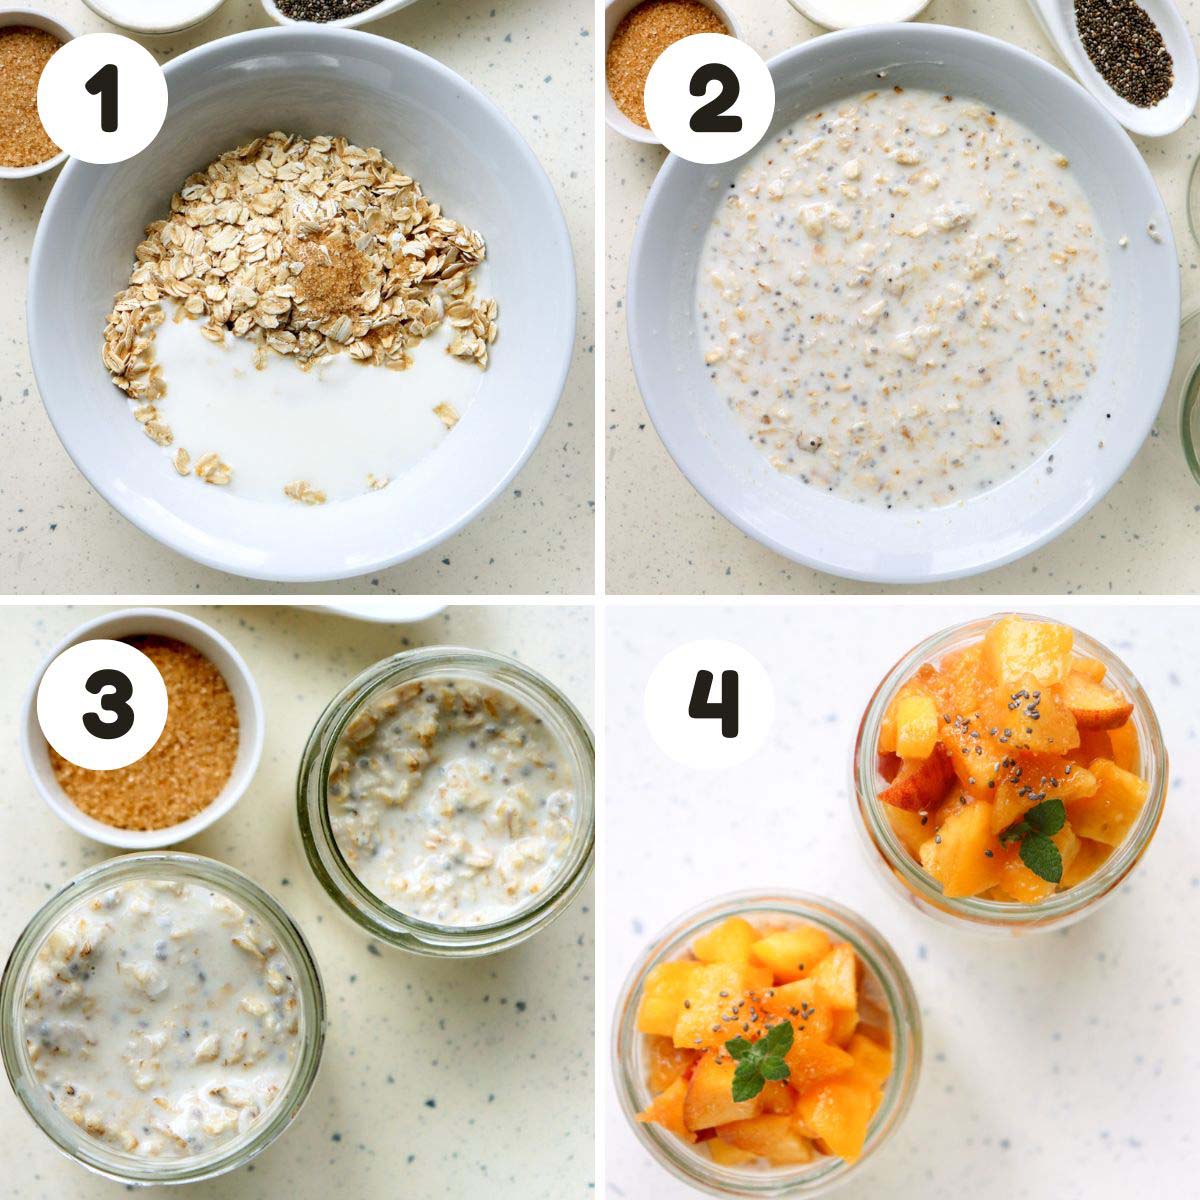 Steps to make the overnight oats.